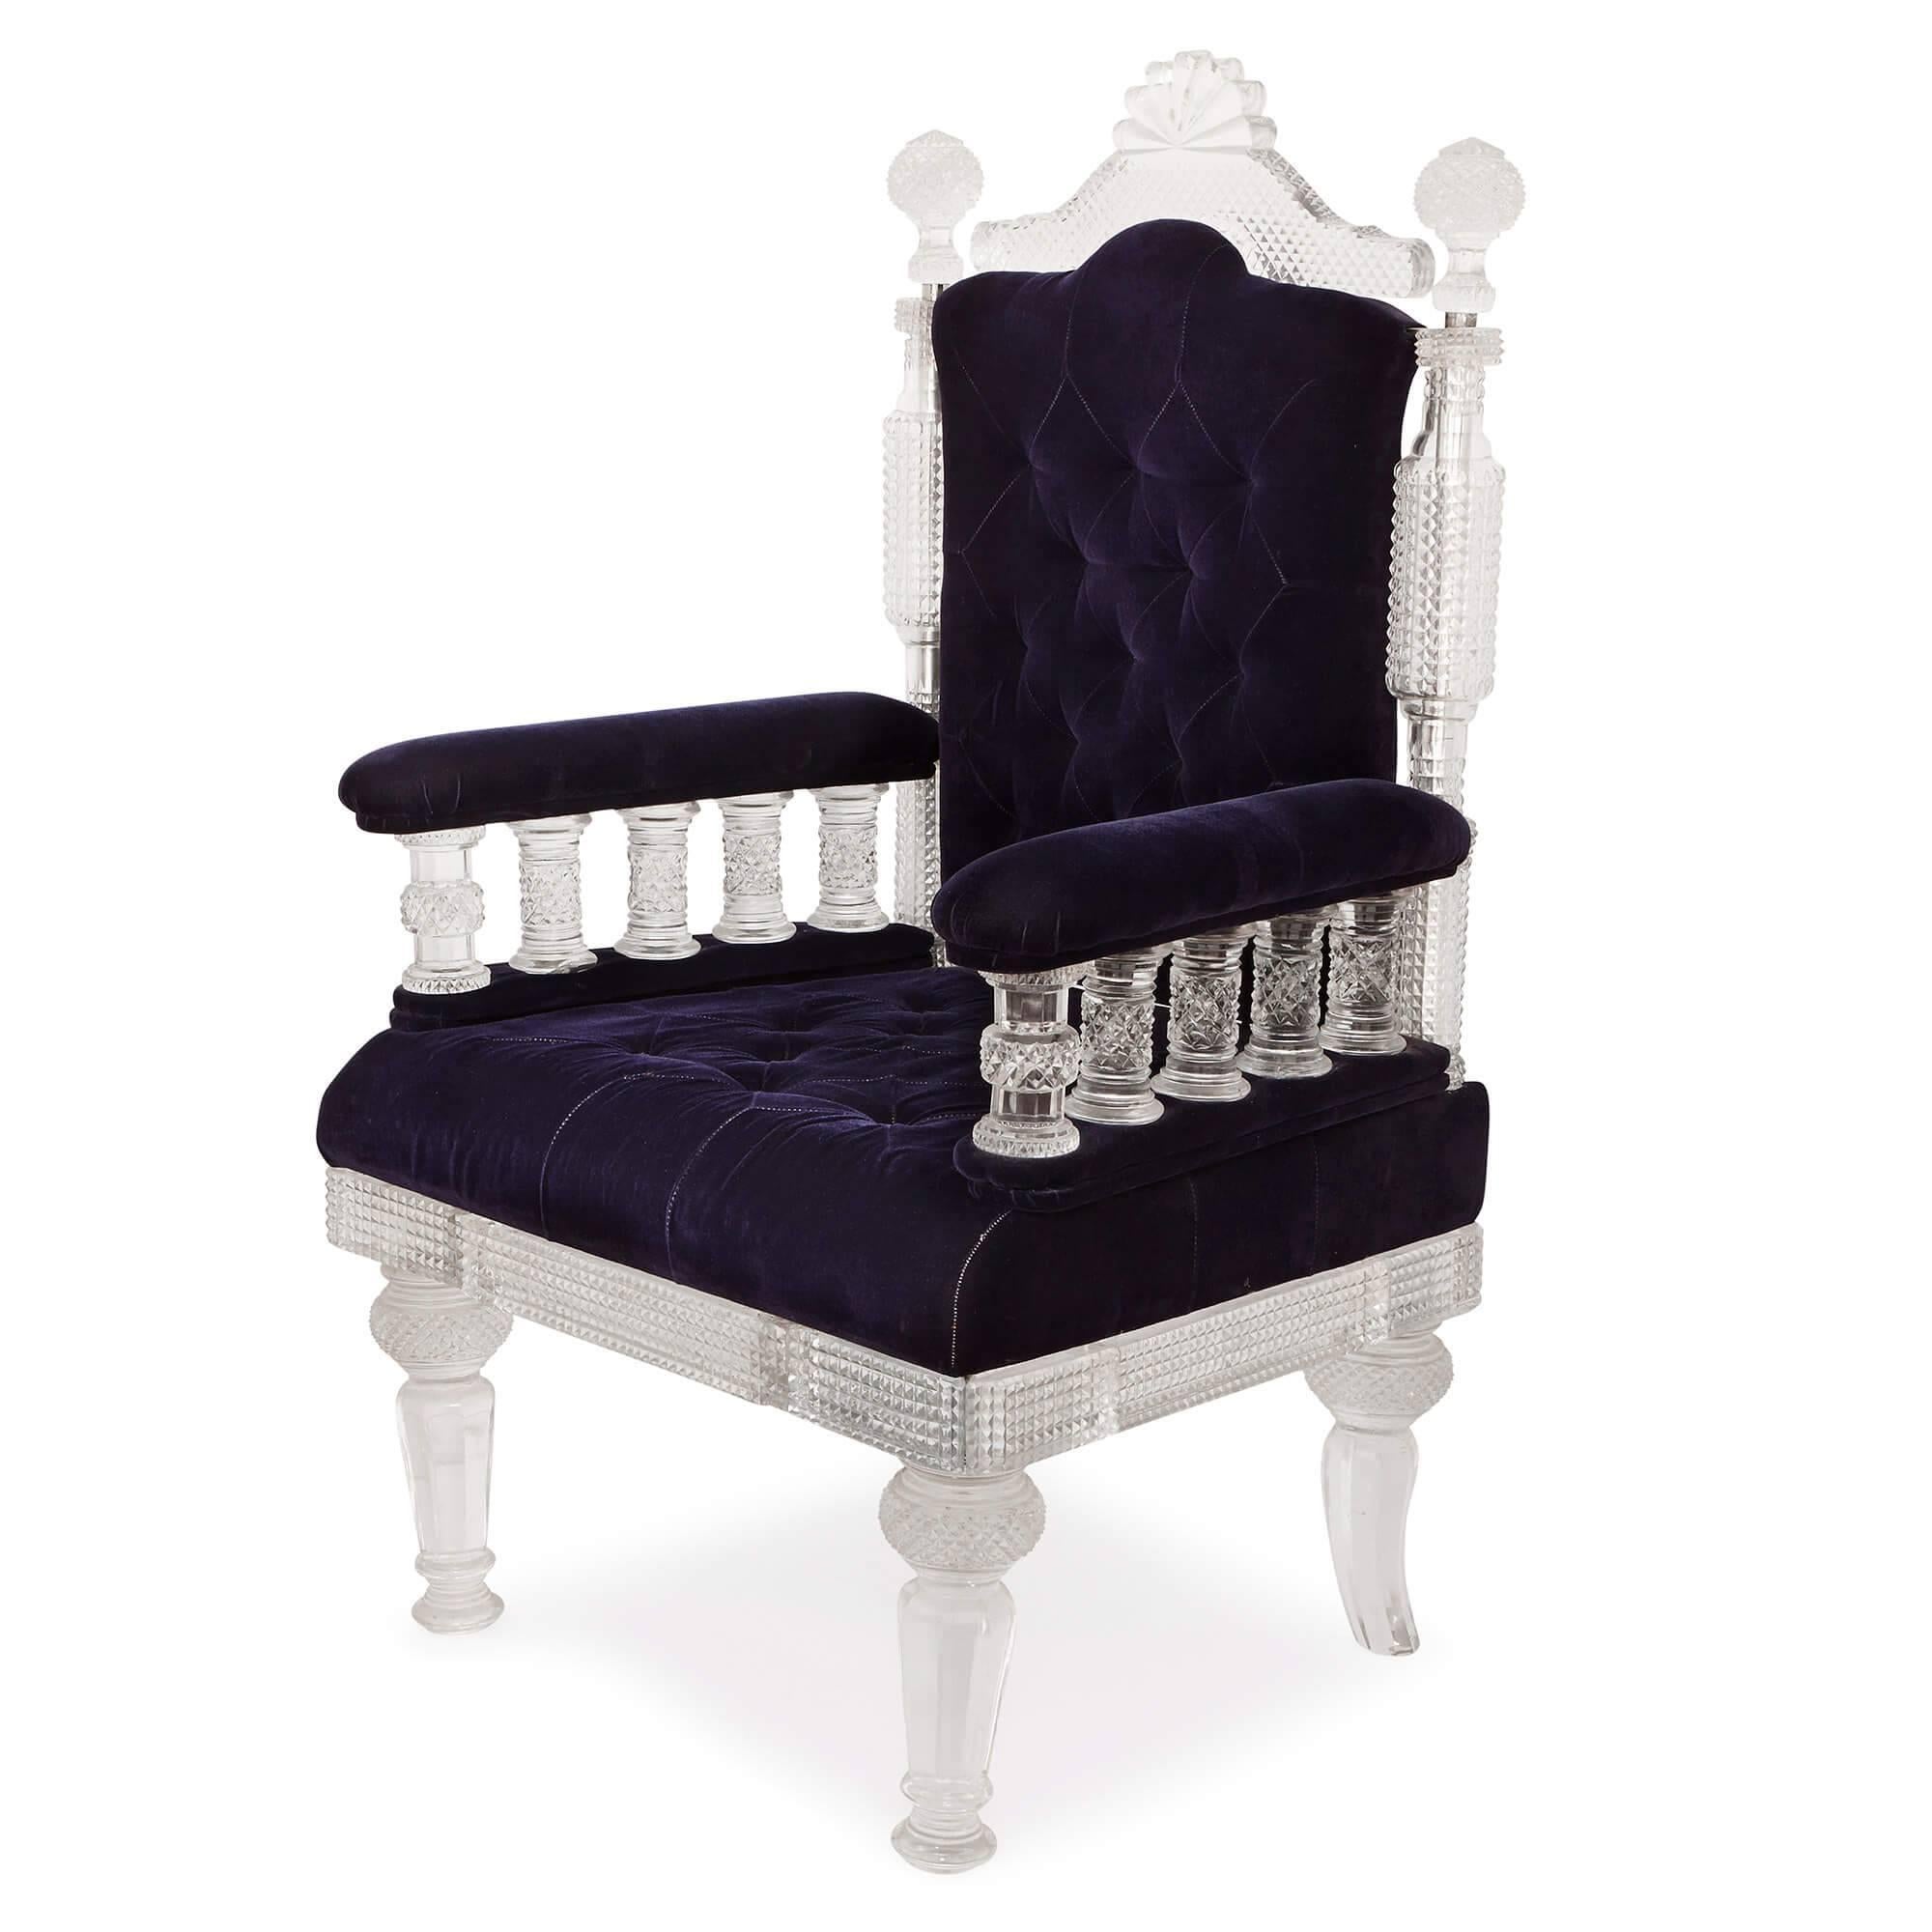 This stunning pair of armchairs are luxury pieces par excellence: built from exquisitely-textured cut glass and upholstered in rich purple velvet, they have been designed with comfort as well as style in mind. The unusual design of these chairs is